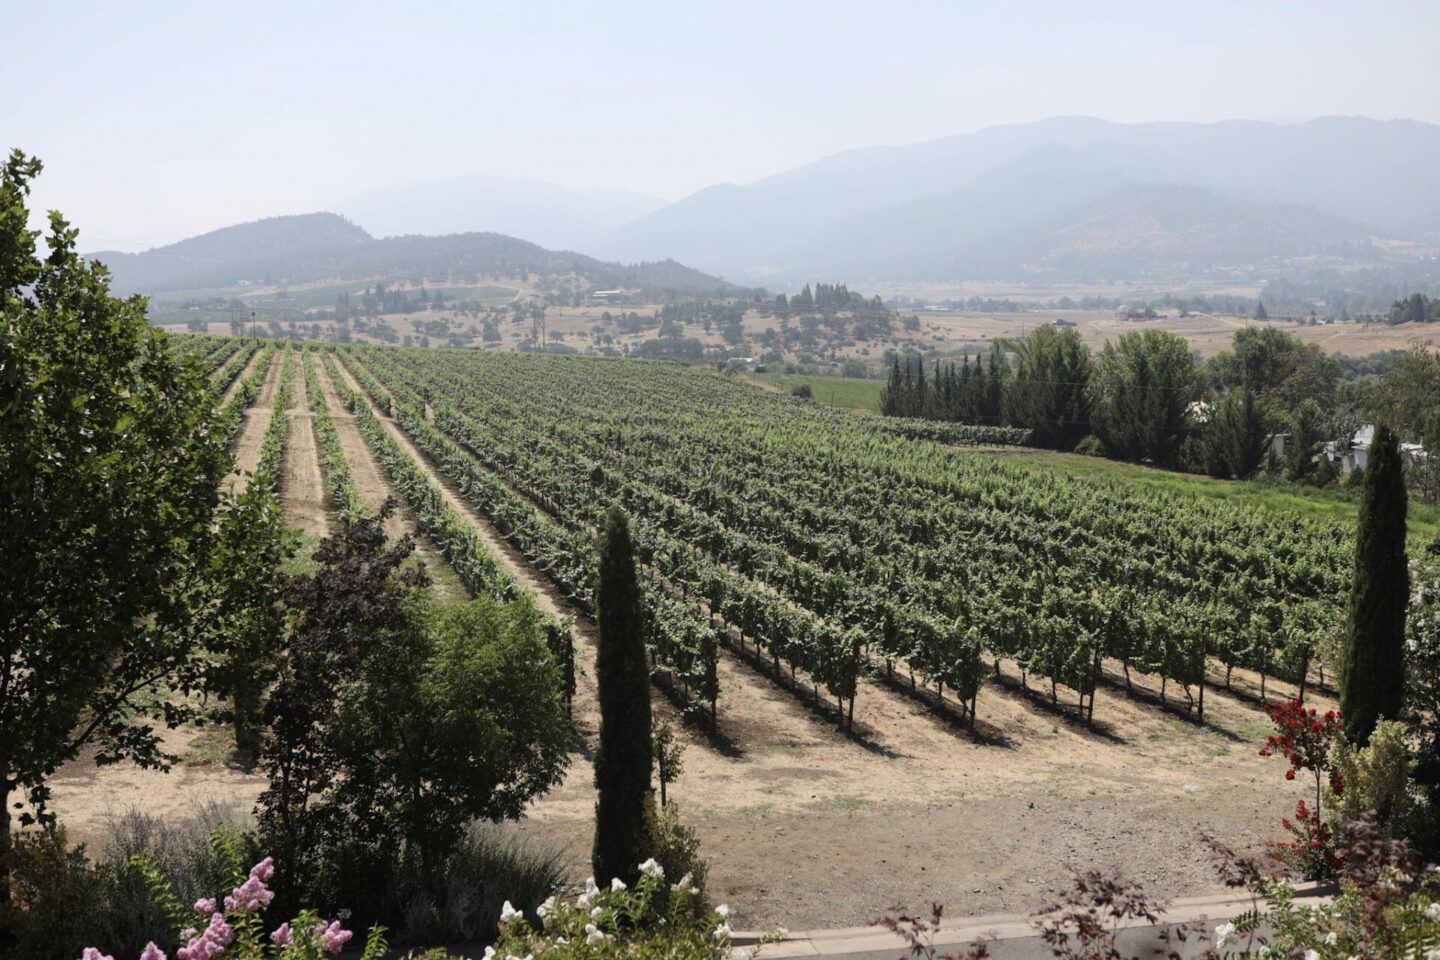 Southern Oregon wineries and vineyards - Rogue Valley wineries outside Ashland